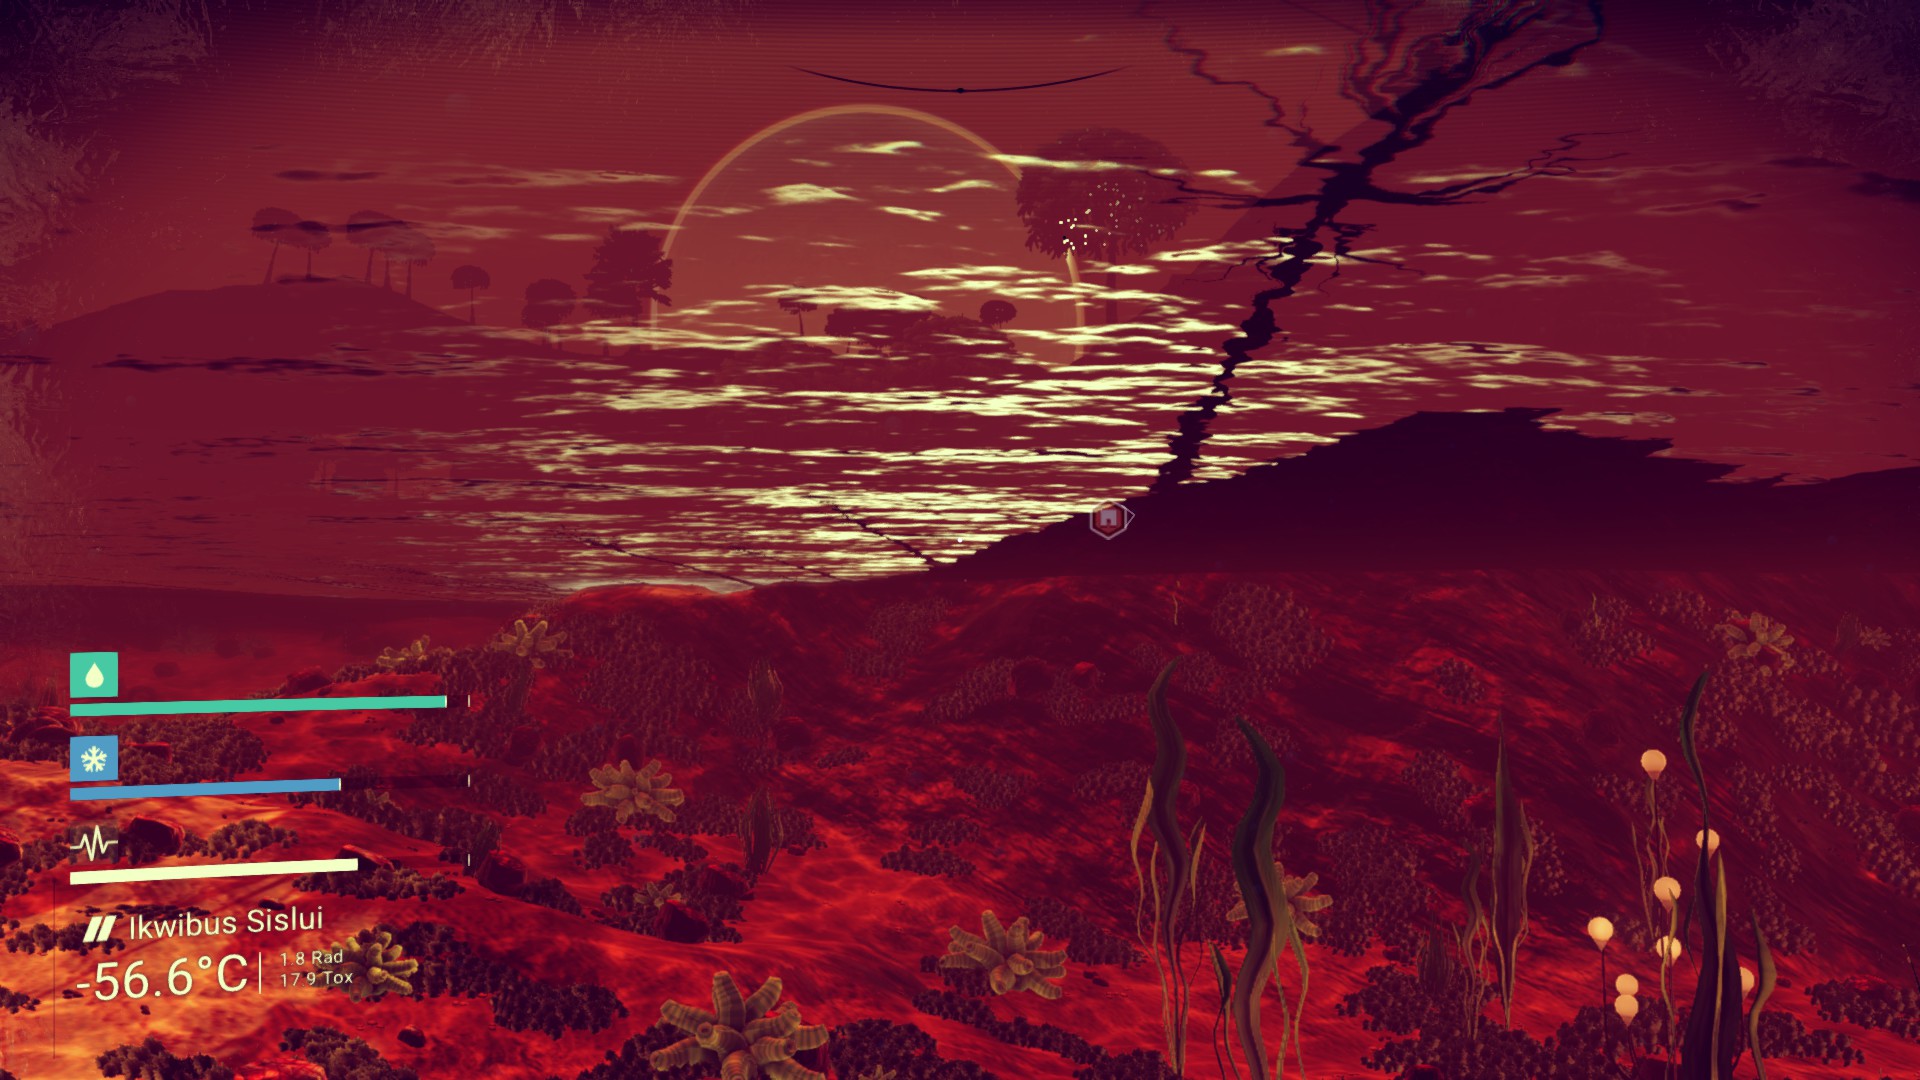 Probably the most interesting planet I've discovered if only for the fact that it has water at sub-zero temperatures.